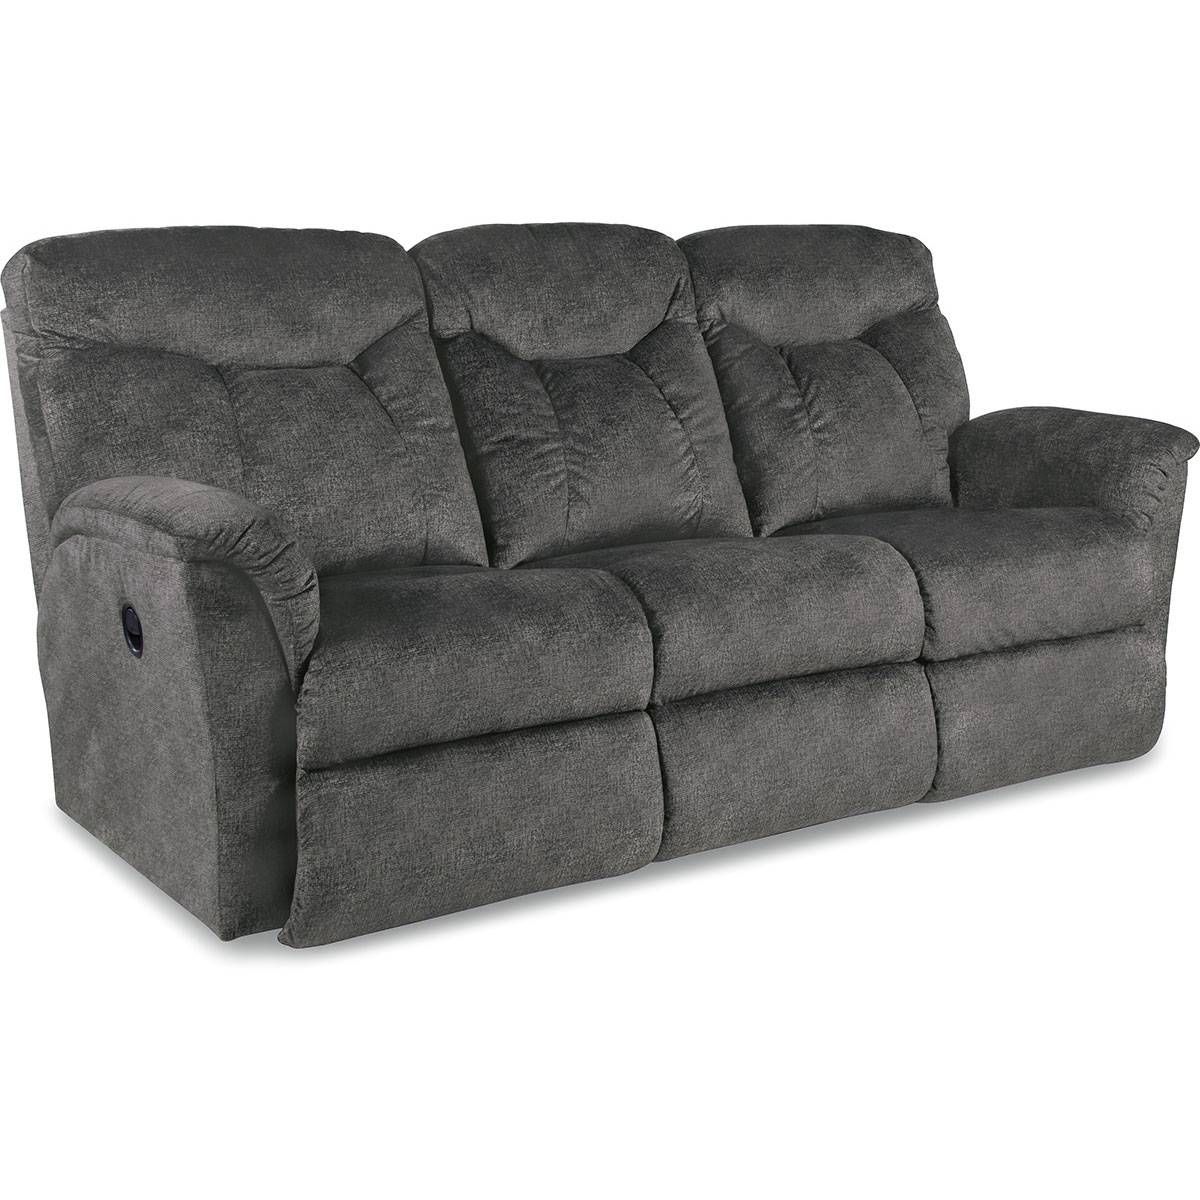 Fortune La Z Time® Full Reclining Sofa Throughout Lazy Boy Sofas (View 15 of 15)